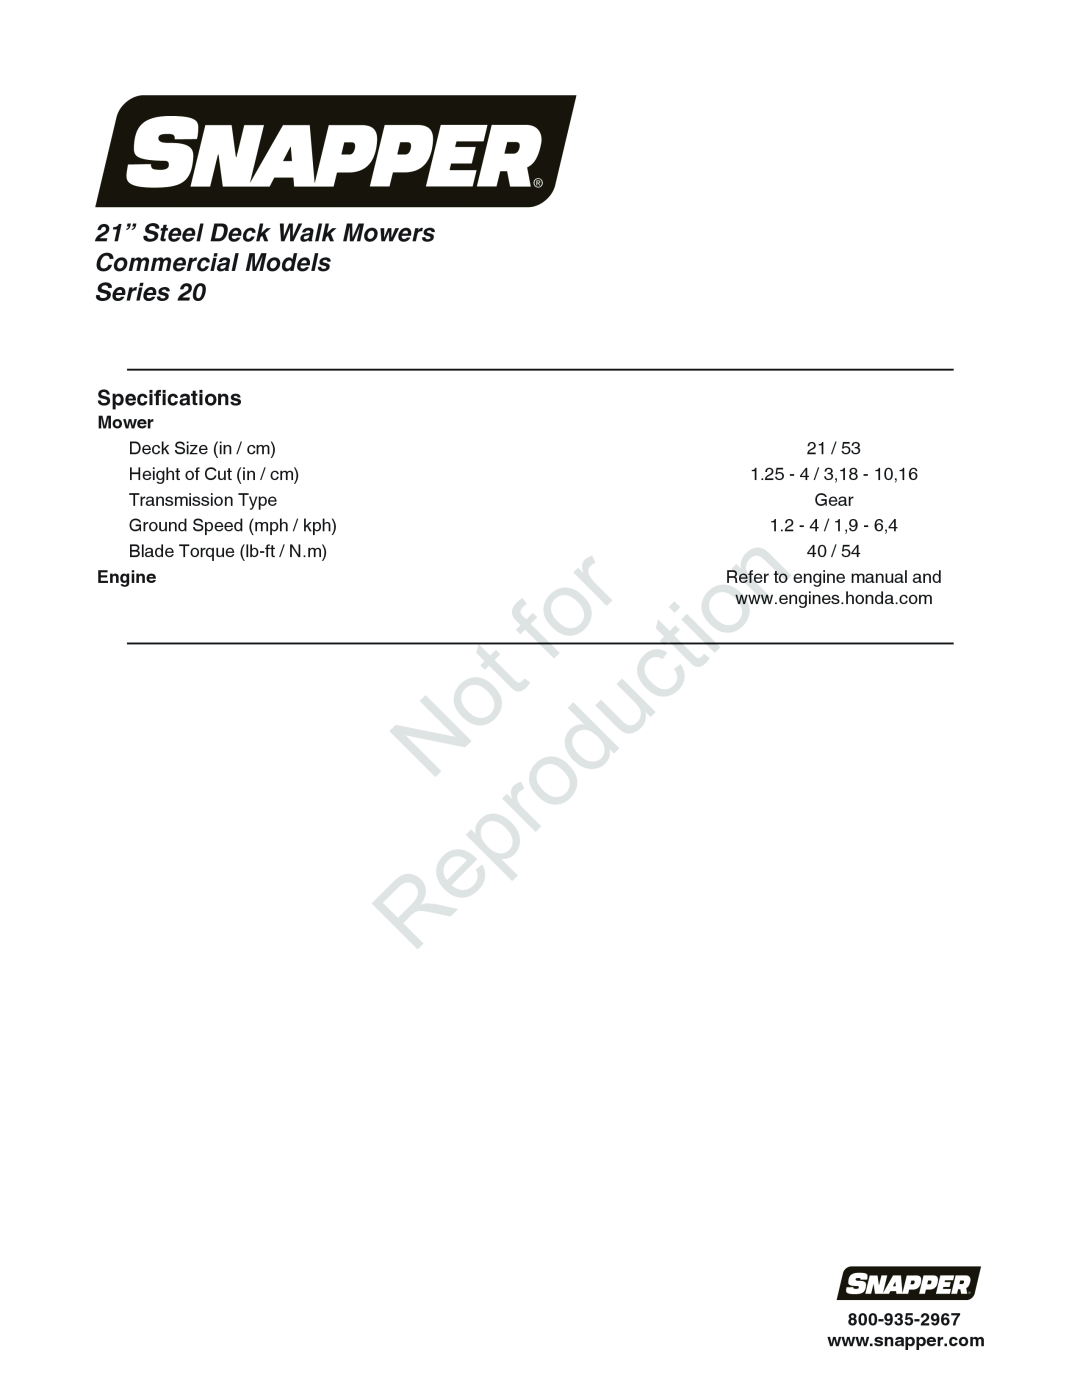 Snapper 7800849 manual 21” Steel Deck Walk Mowers Commercial Models Series, Specifications, Reproduction 